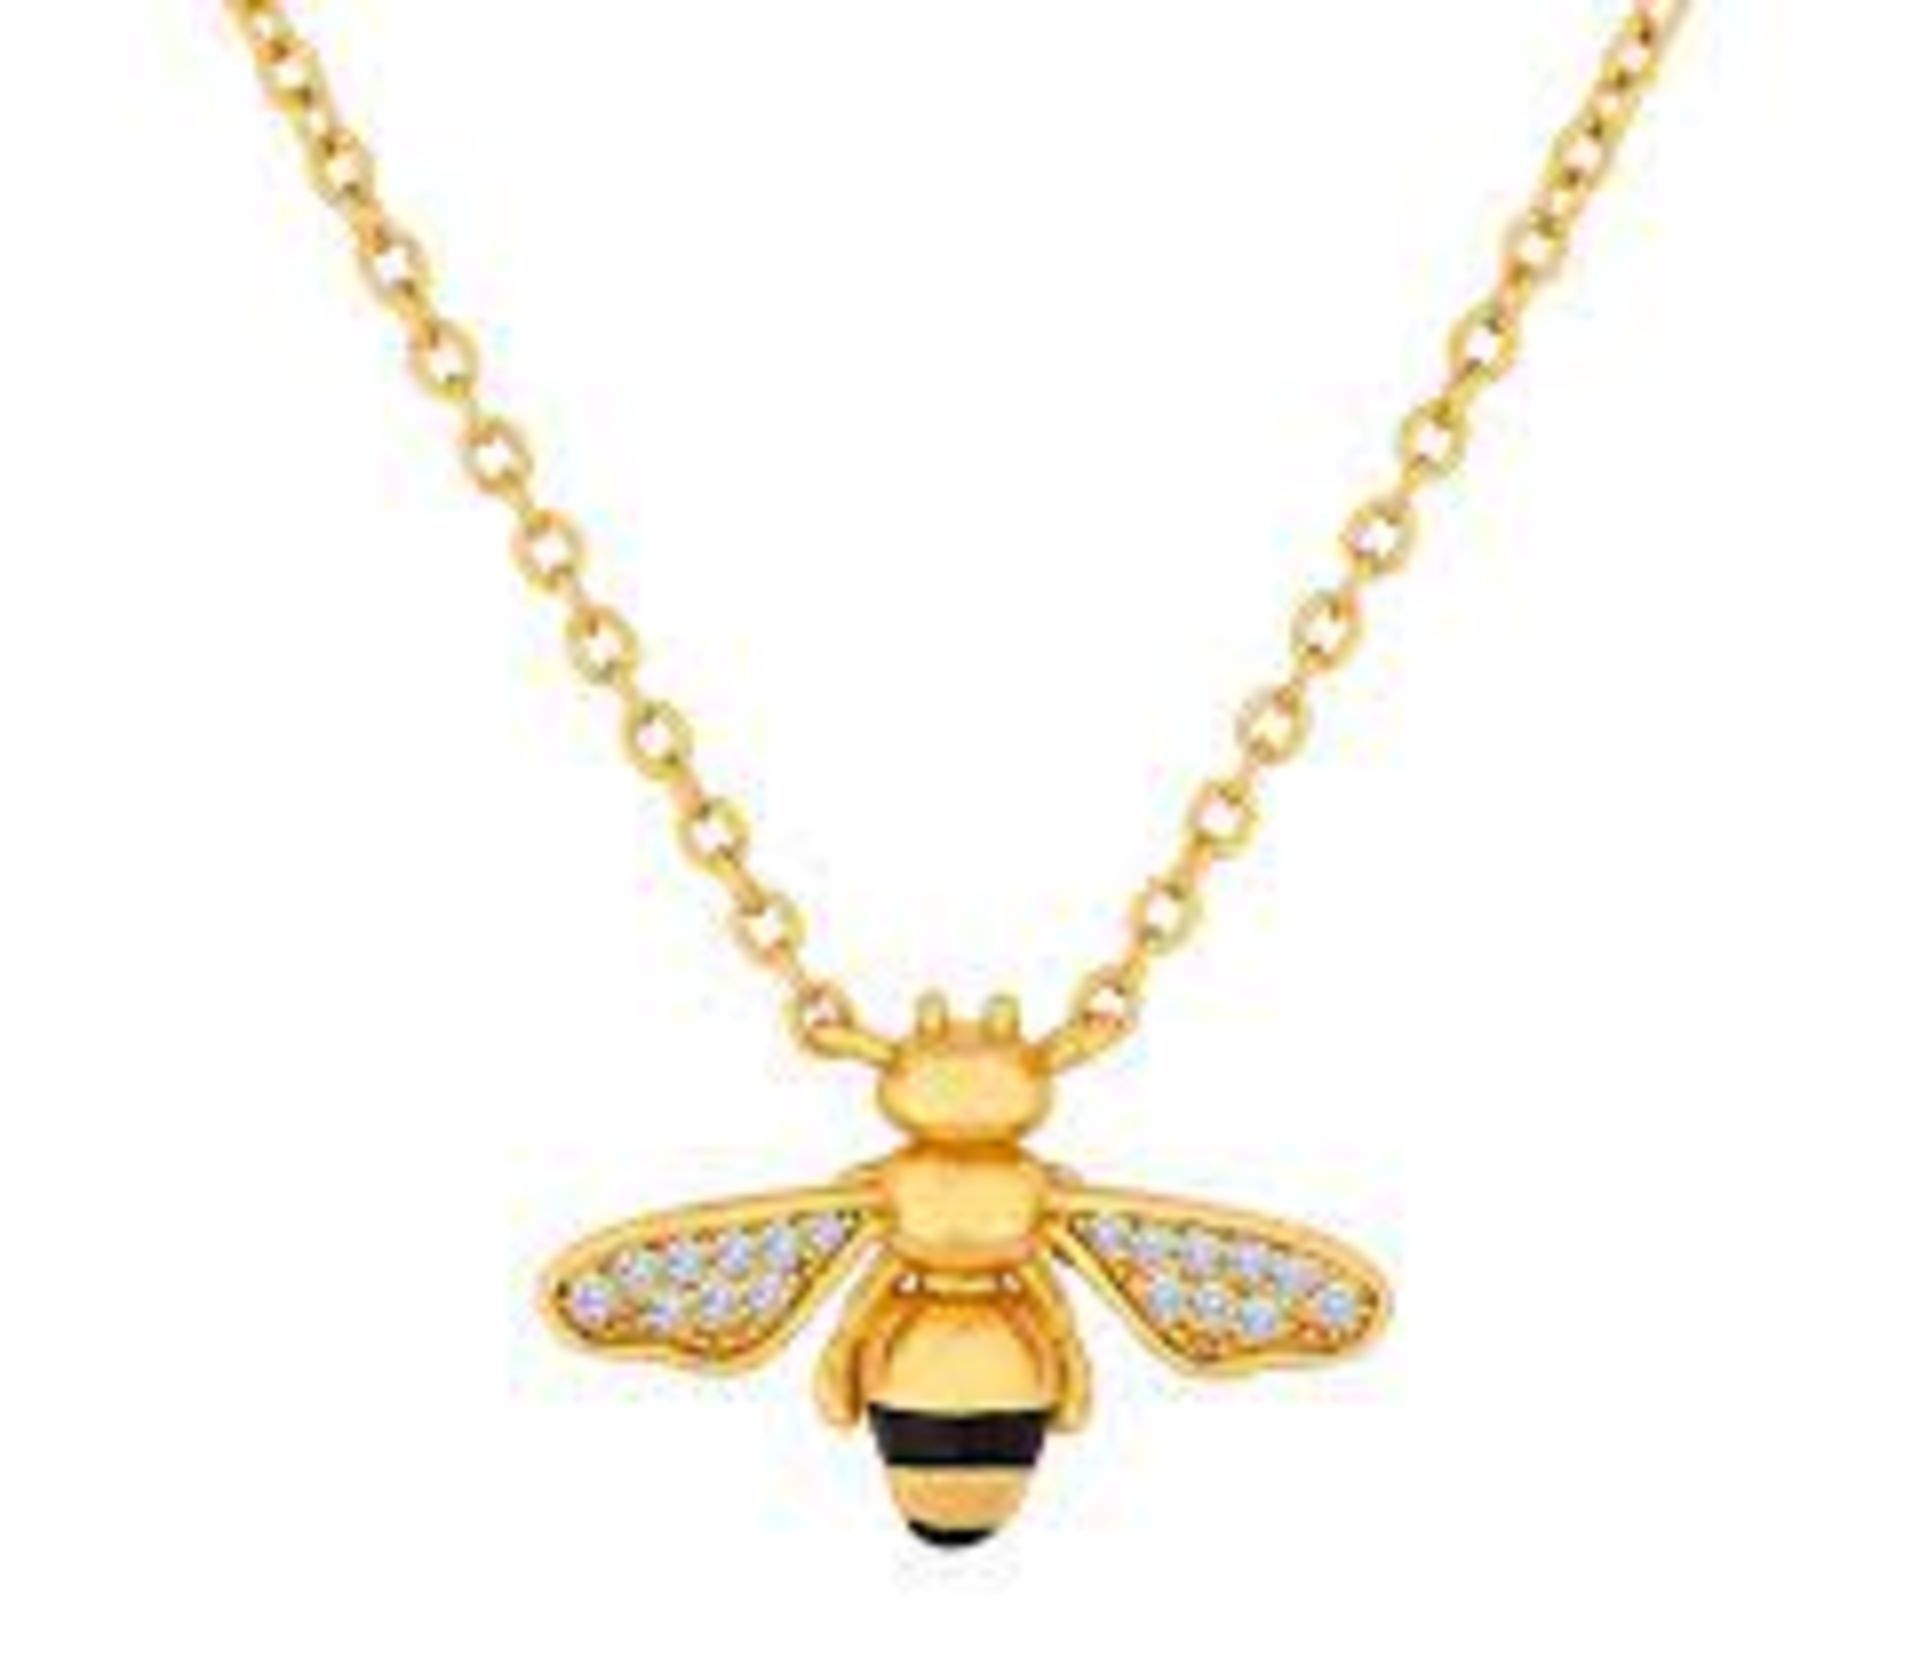 12 X BRAND NEW DIAMONDSTYLE LONDON BEE PENDANT IN GOLD PLATING WITH CRYSTALS WITH CERTIFICATION OF